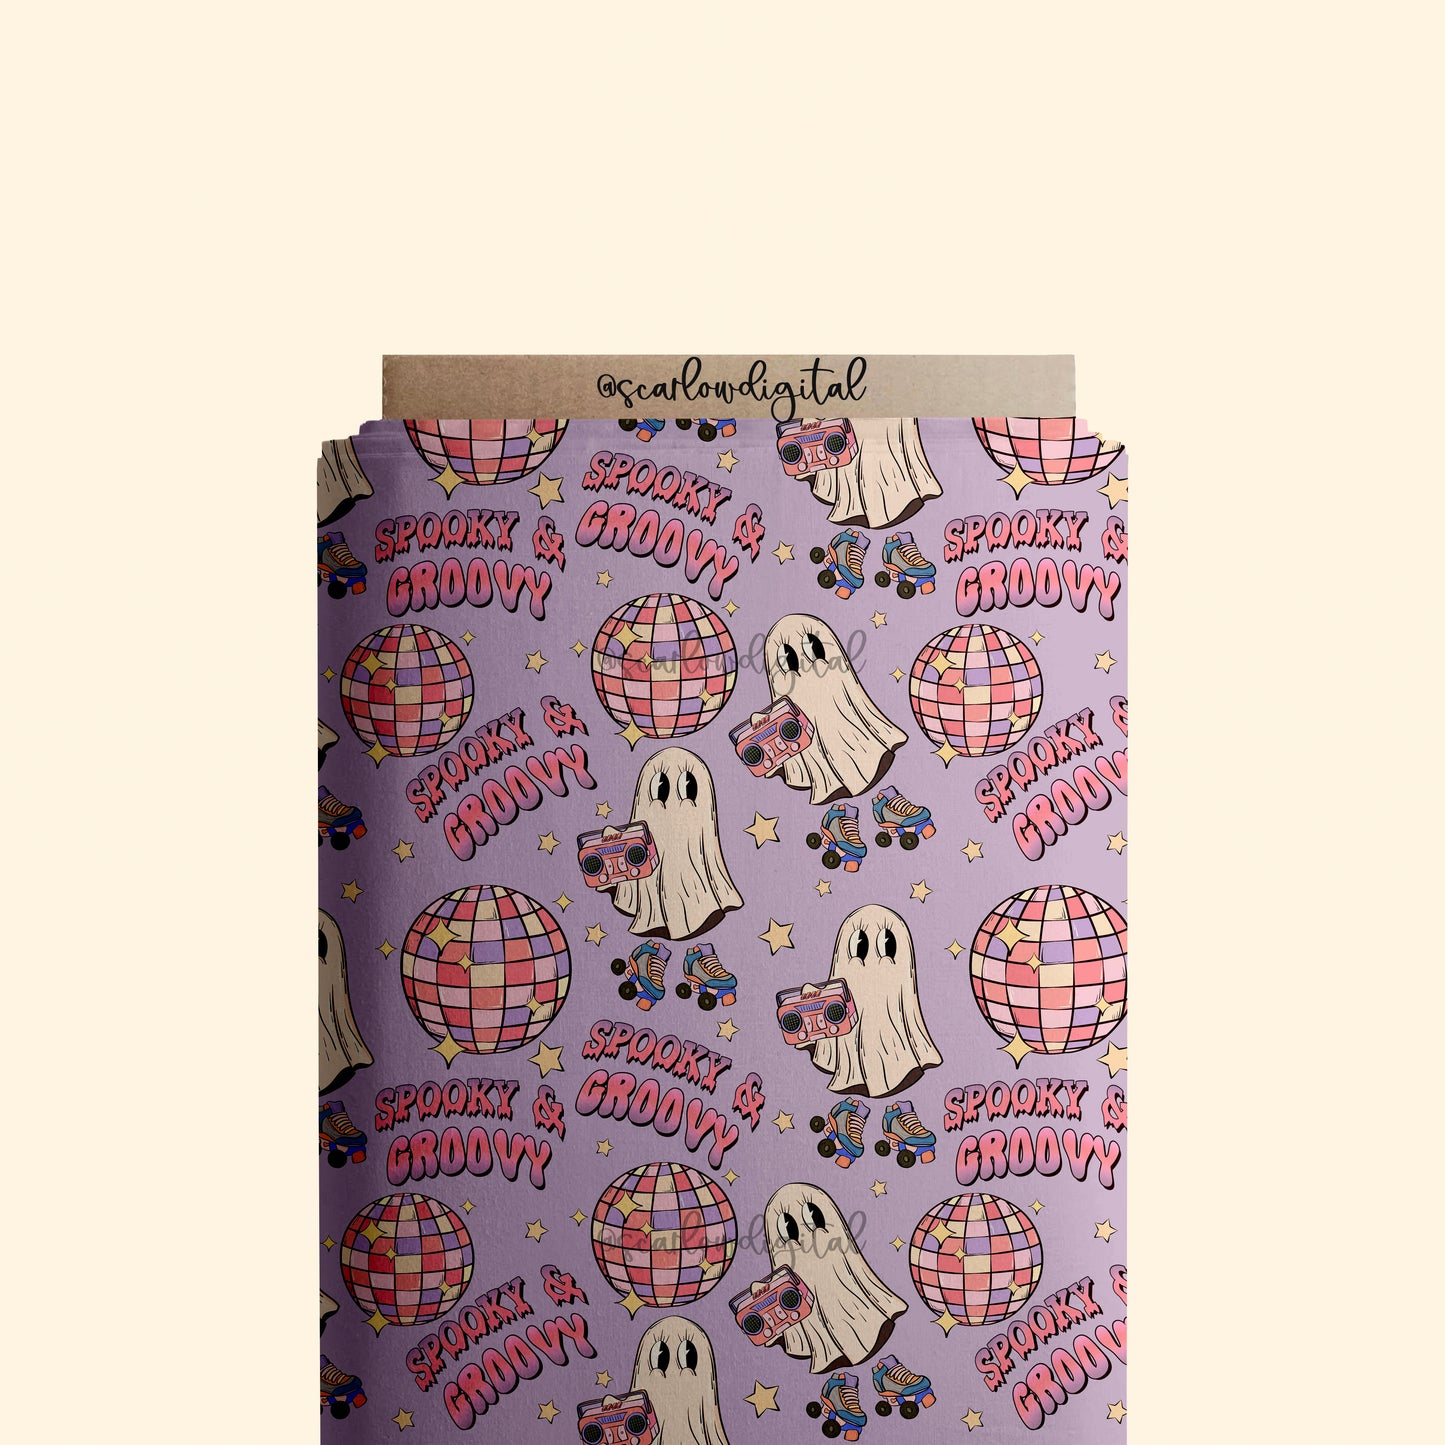 Spooky and Groovy Seamless Pattern-Halloween Sublimation Digital Design Download-ghost seamless file, vintage halloween seamless pattern